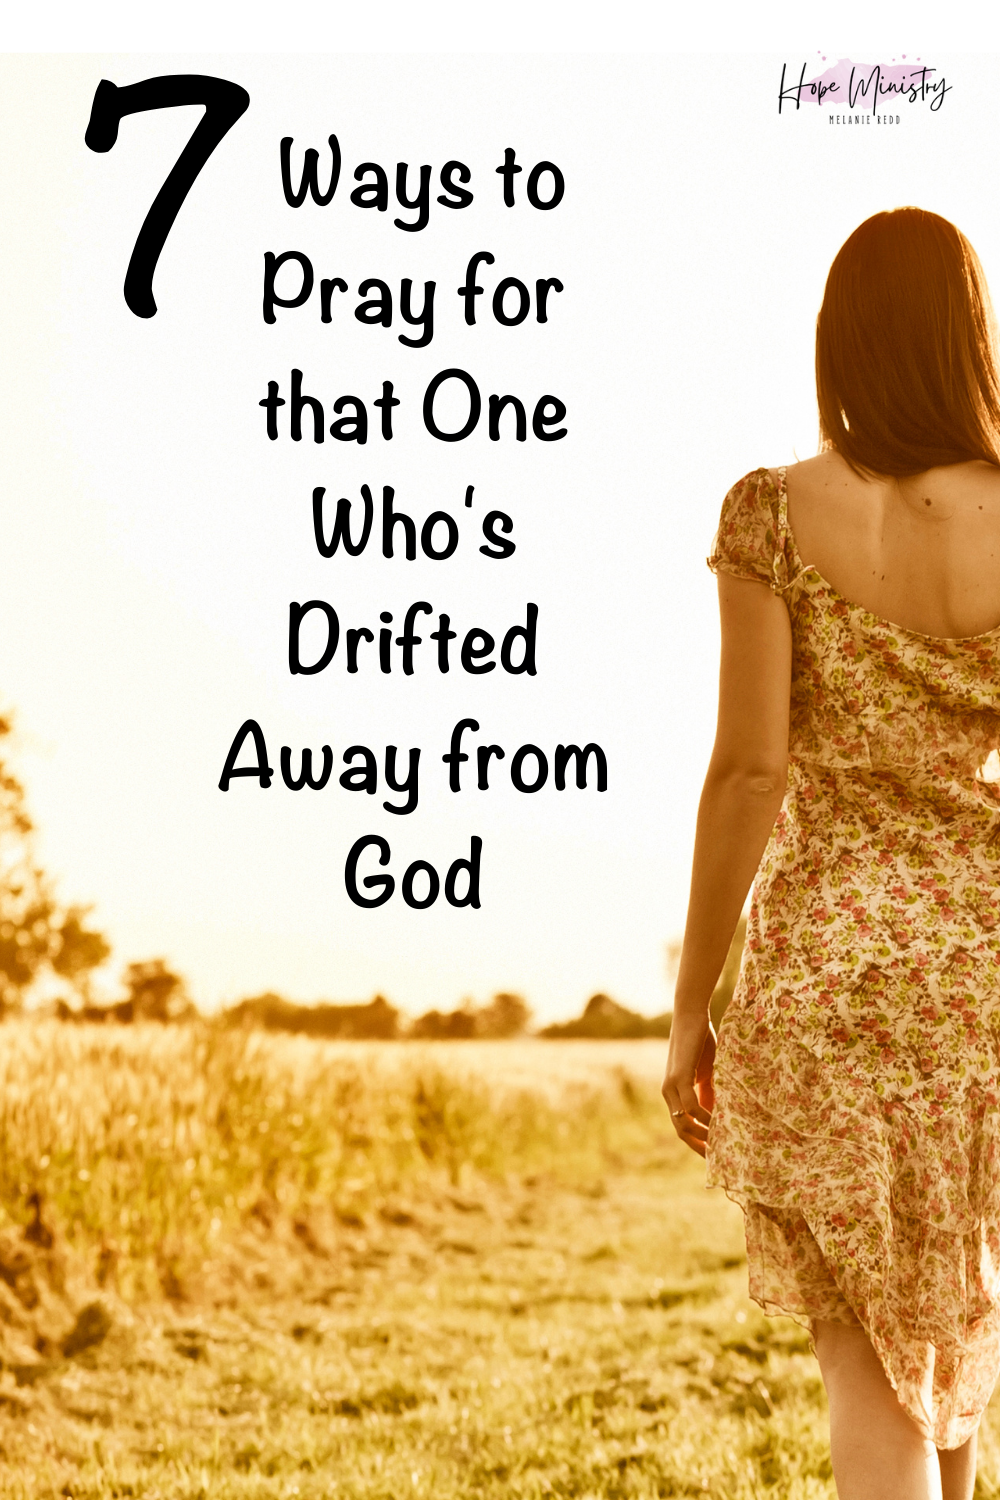 Sometimes, those we love pull away from God. They drift. How can we help? Here are 7 ways to pray for that one who's drifted away from God. #driftedaway #drifted #pray #prayer